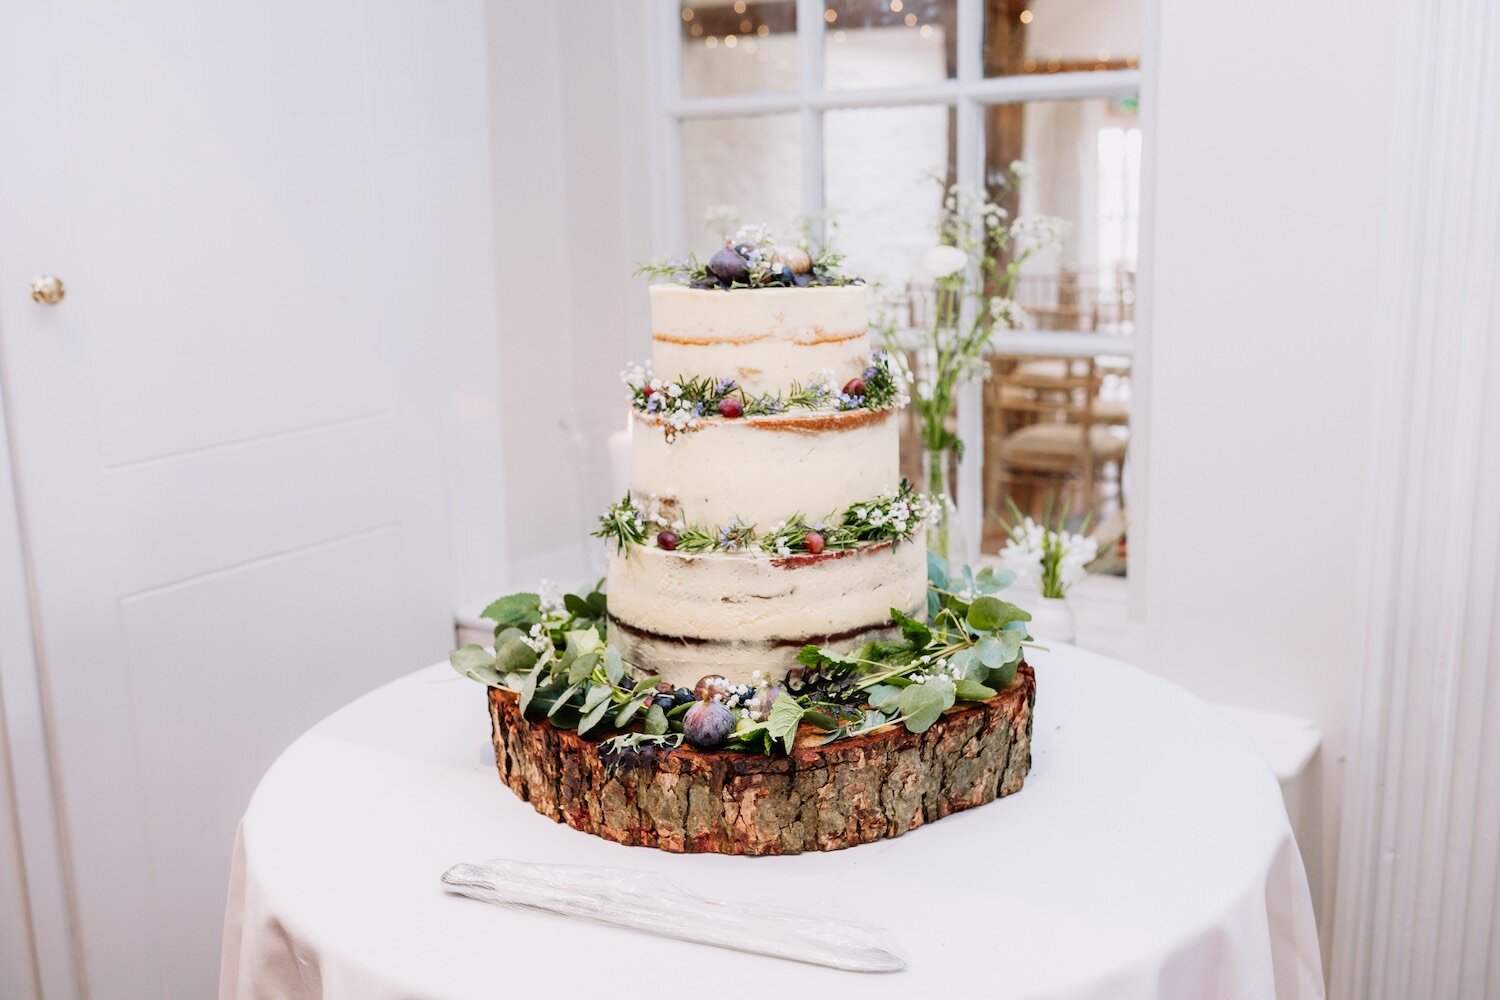 Wedding cake with flowers and berries